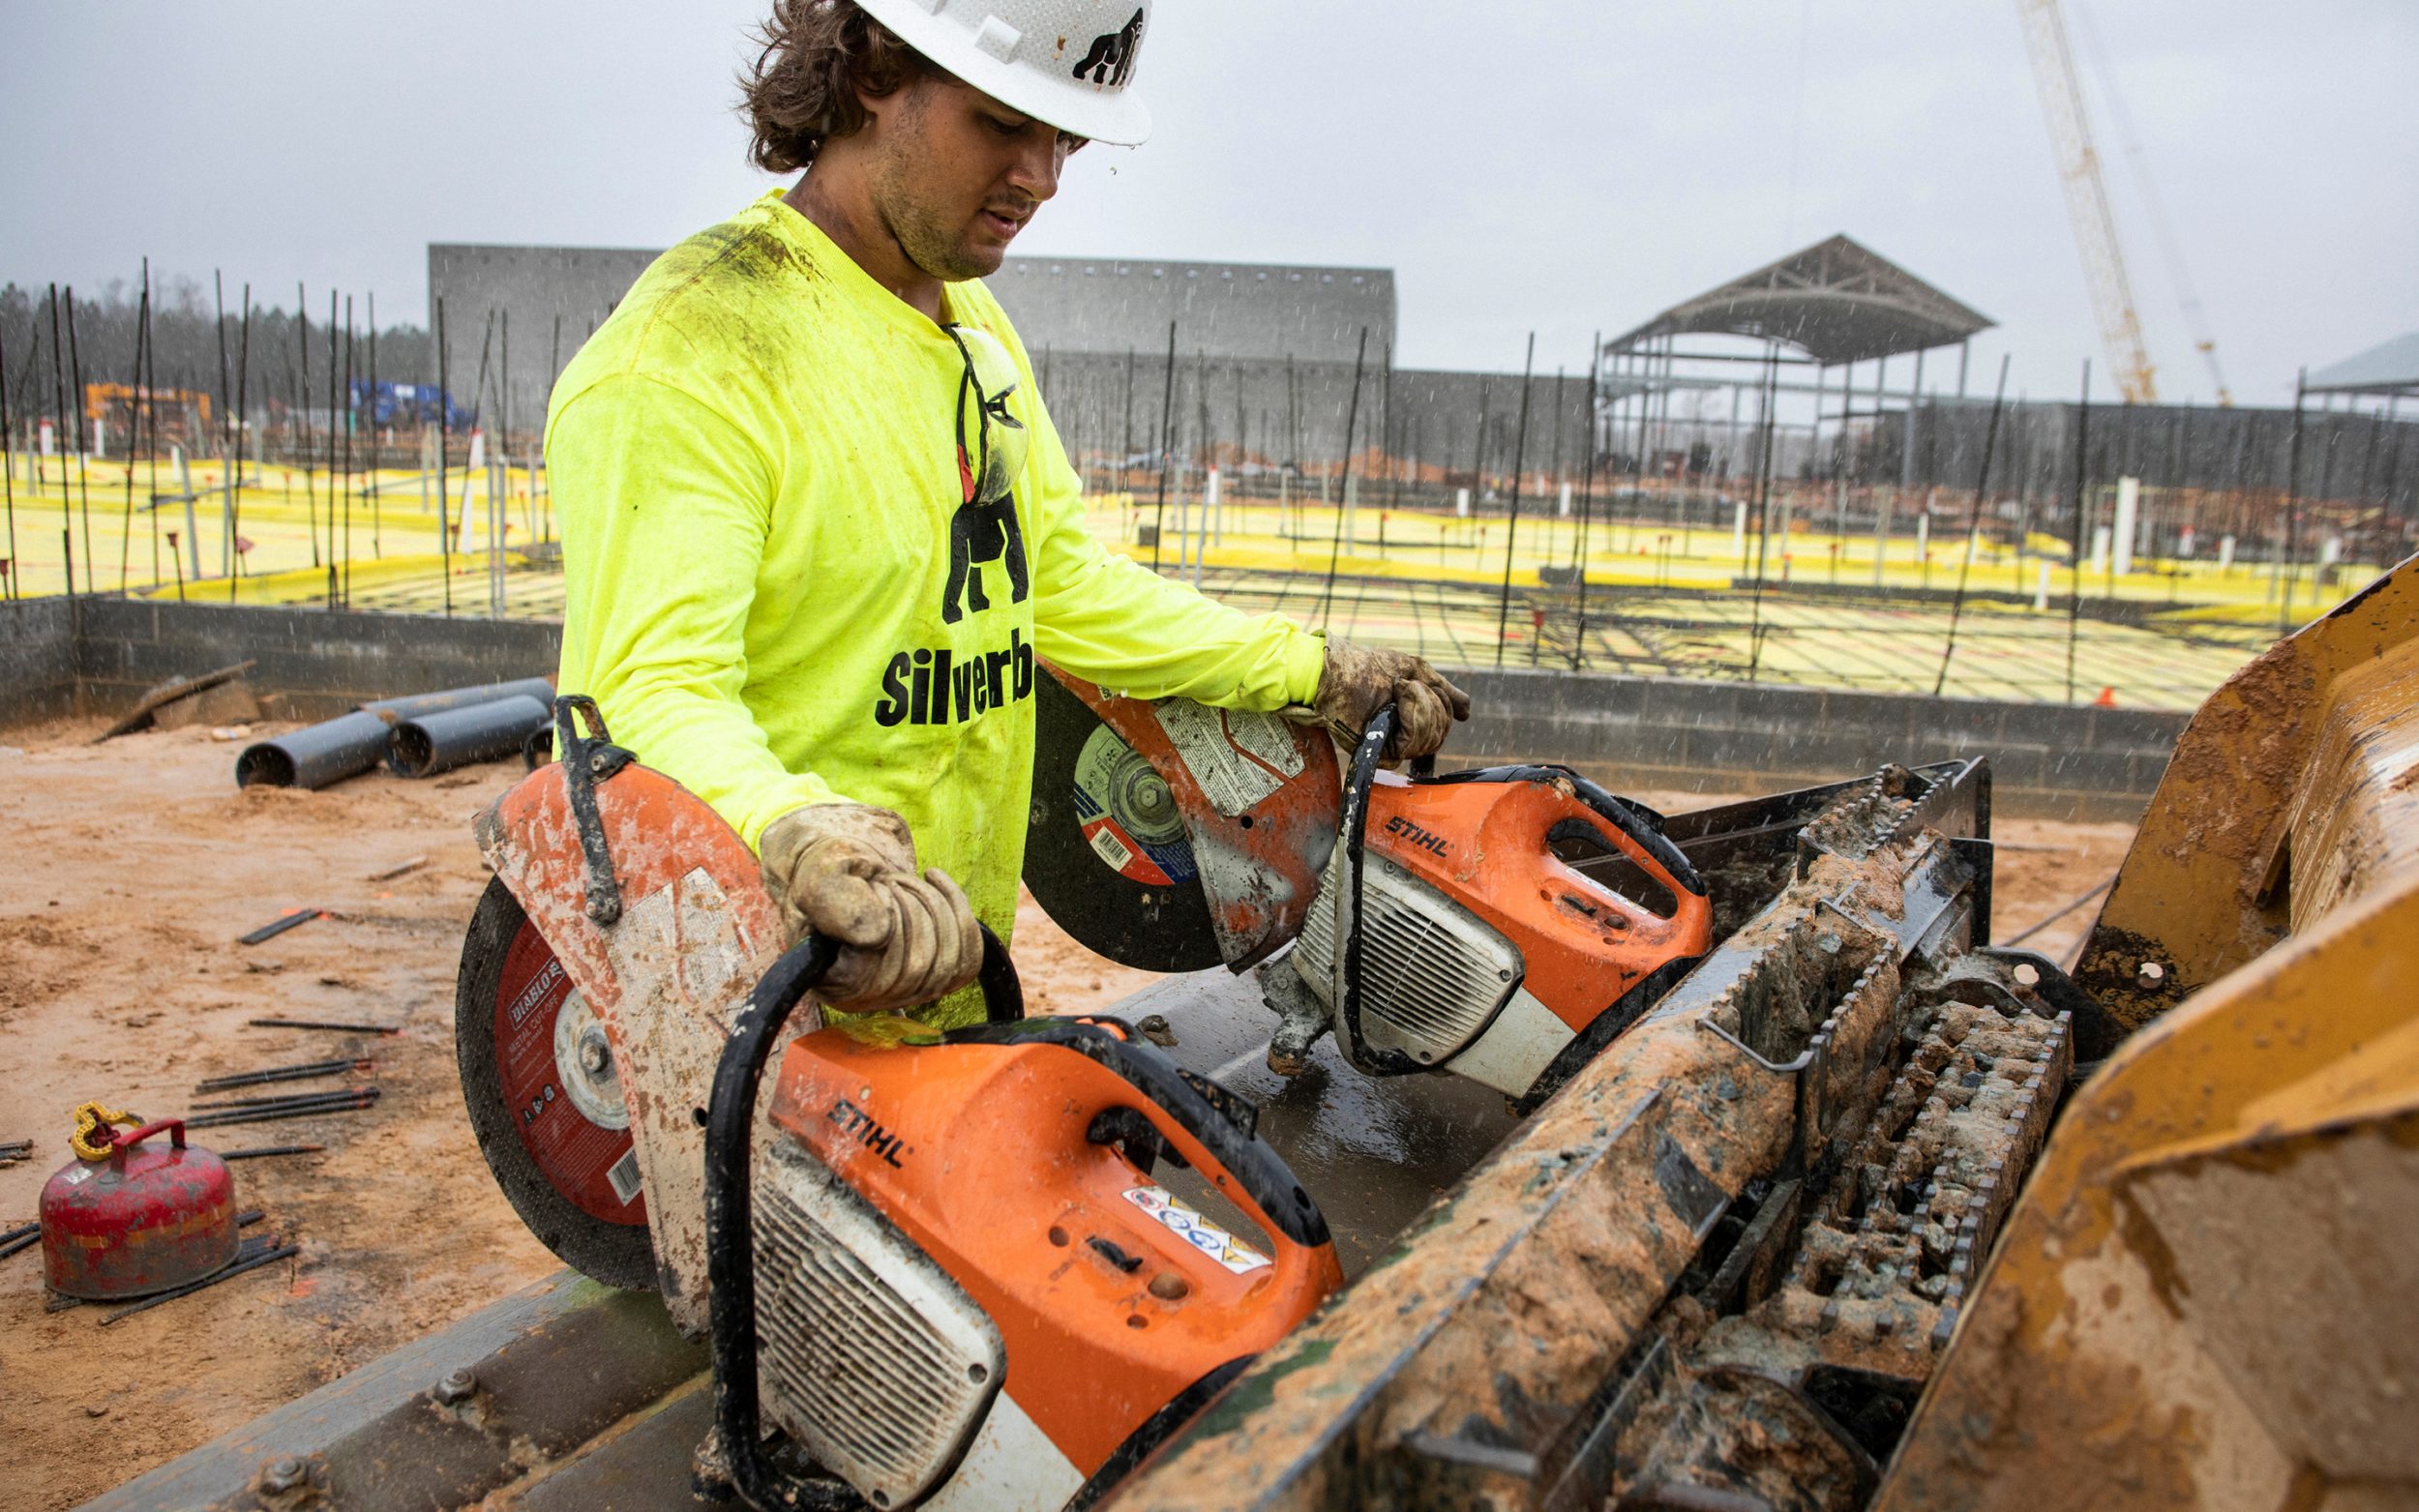 Profession photo of construction worker with equipment; Silverback Concrete.